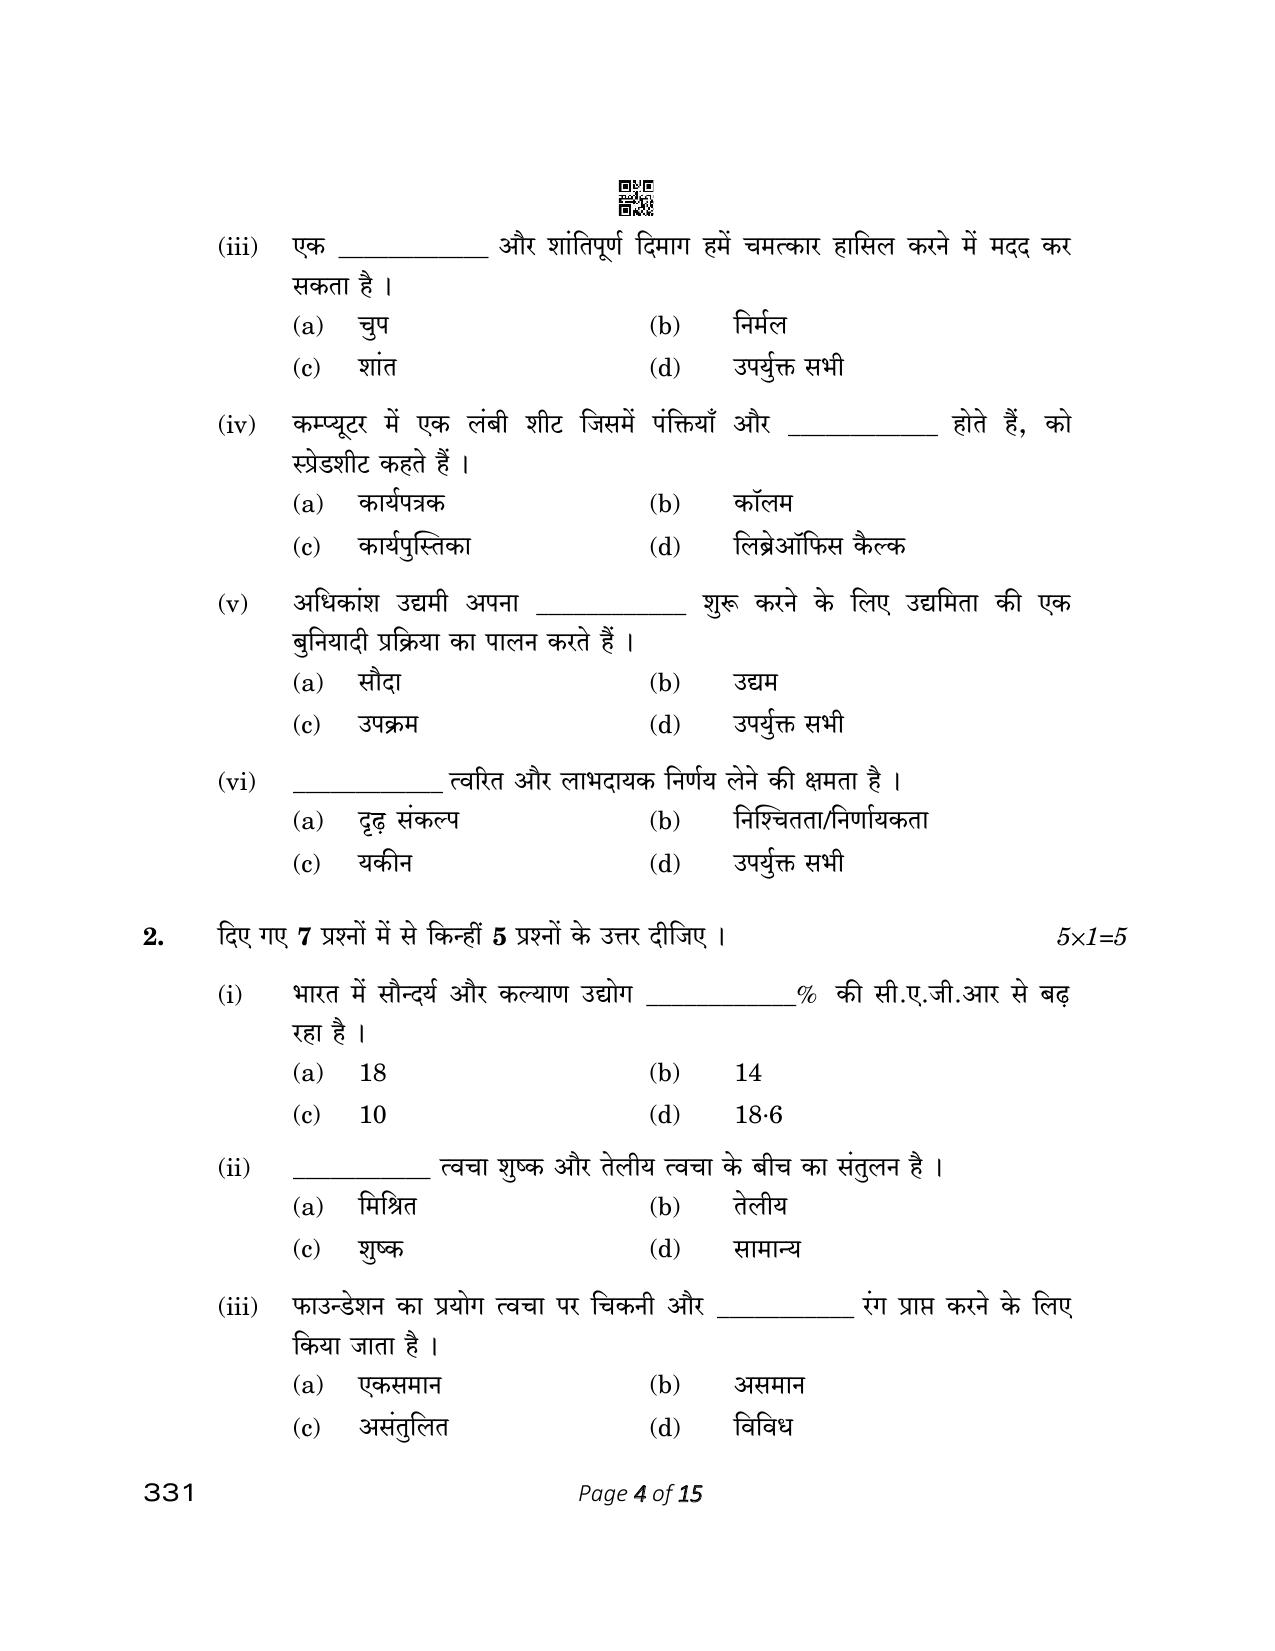 CBSE Class 12 331 Beauty And Wellness 2023 Question Paper - Page 4